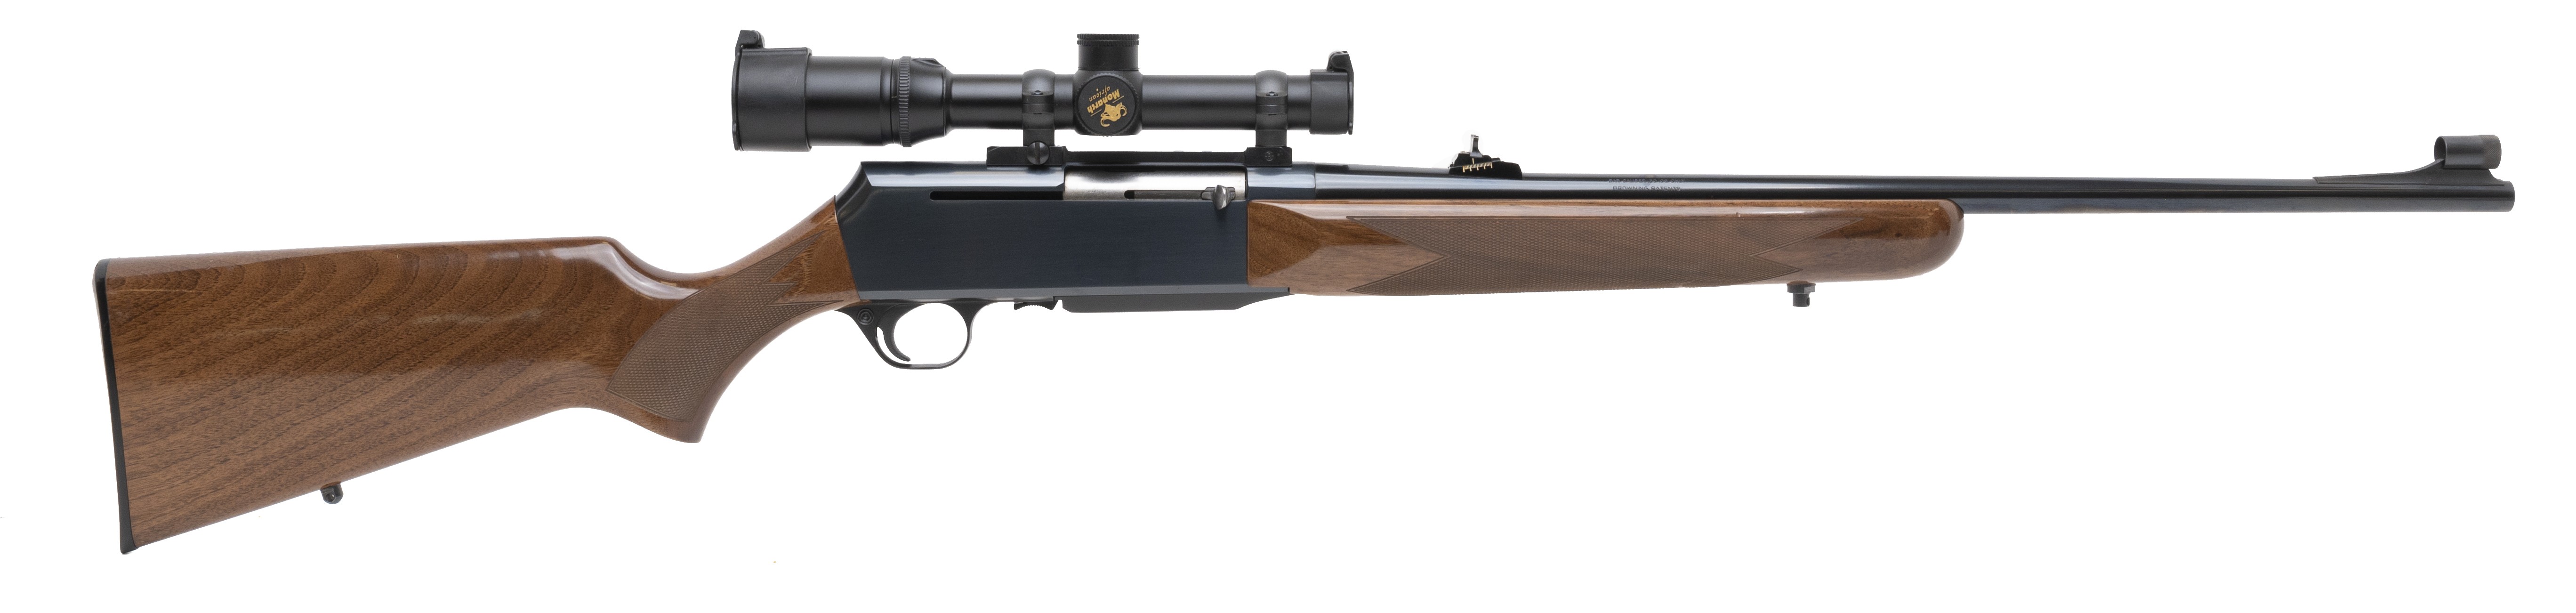 Browning Express 30 06 Caliber Rifle For Sale 279